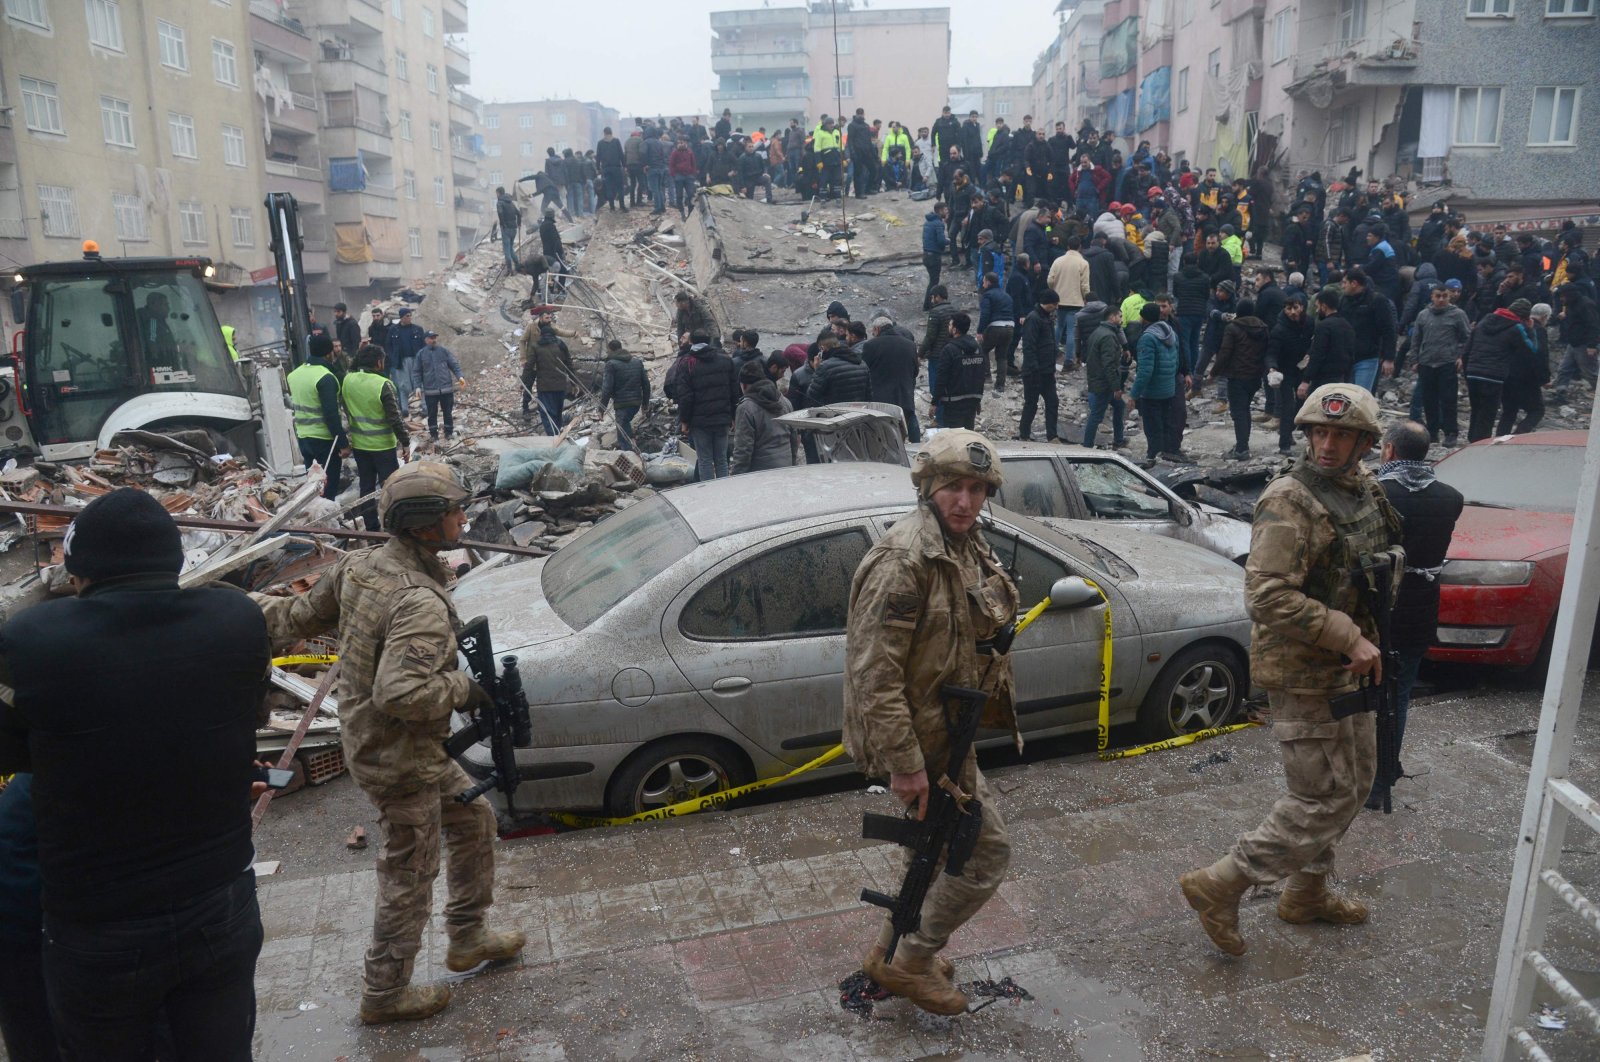 Soldiers help in the efforts as people search through the rubble for survivors in Diyarbakır after a 7.8-magnitude earthquake, southeastern Türkiye, Feb. 6, 2023. (AFP Photo)